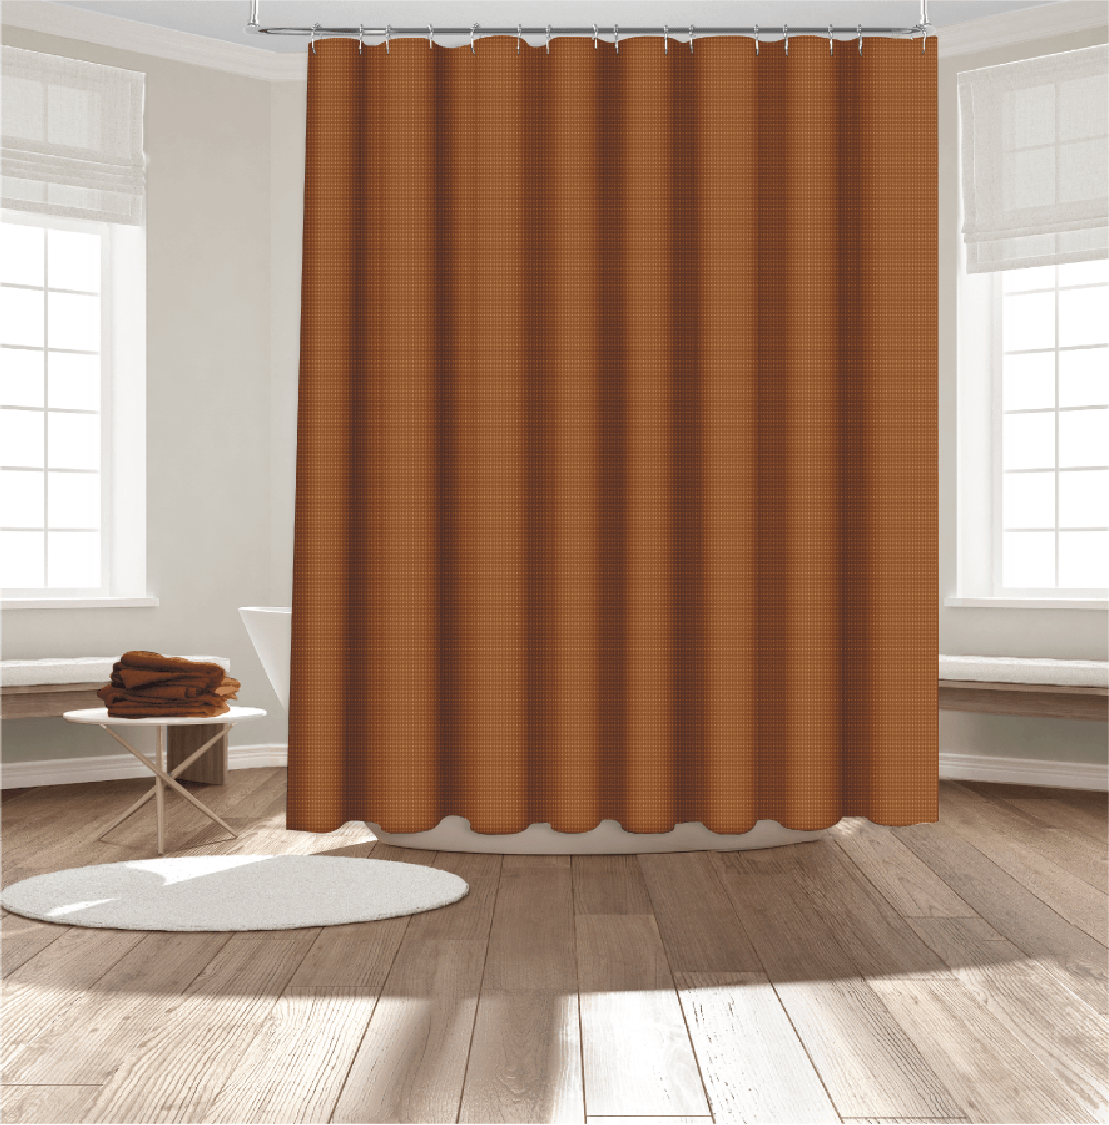 14 Pieces Toffee Roaring Fork Shower Curtain with Liner